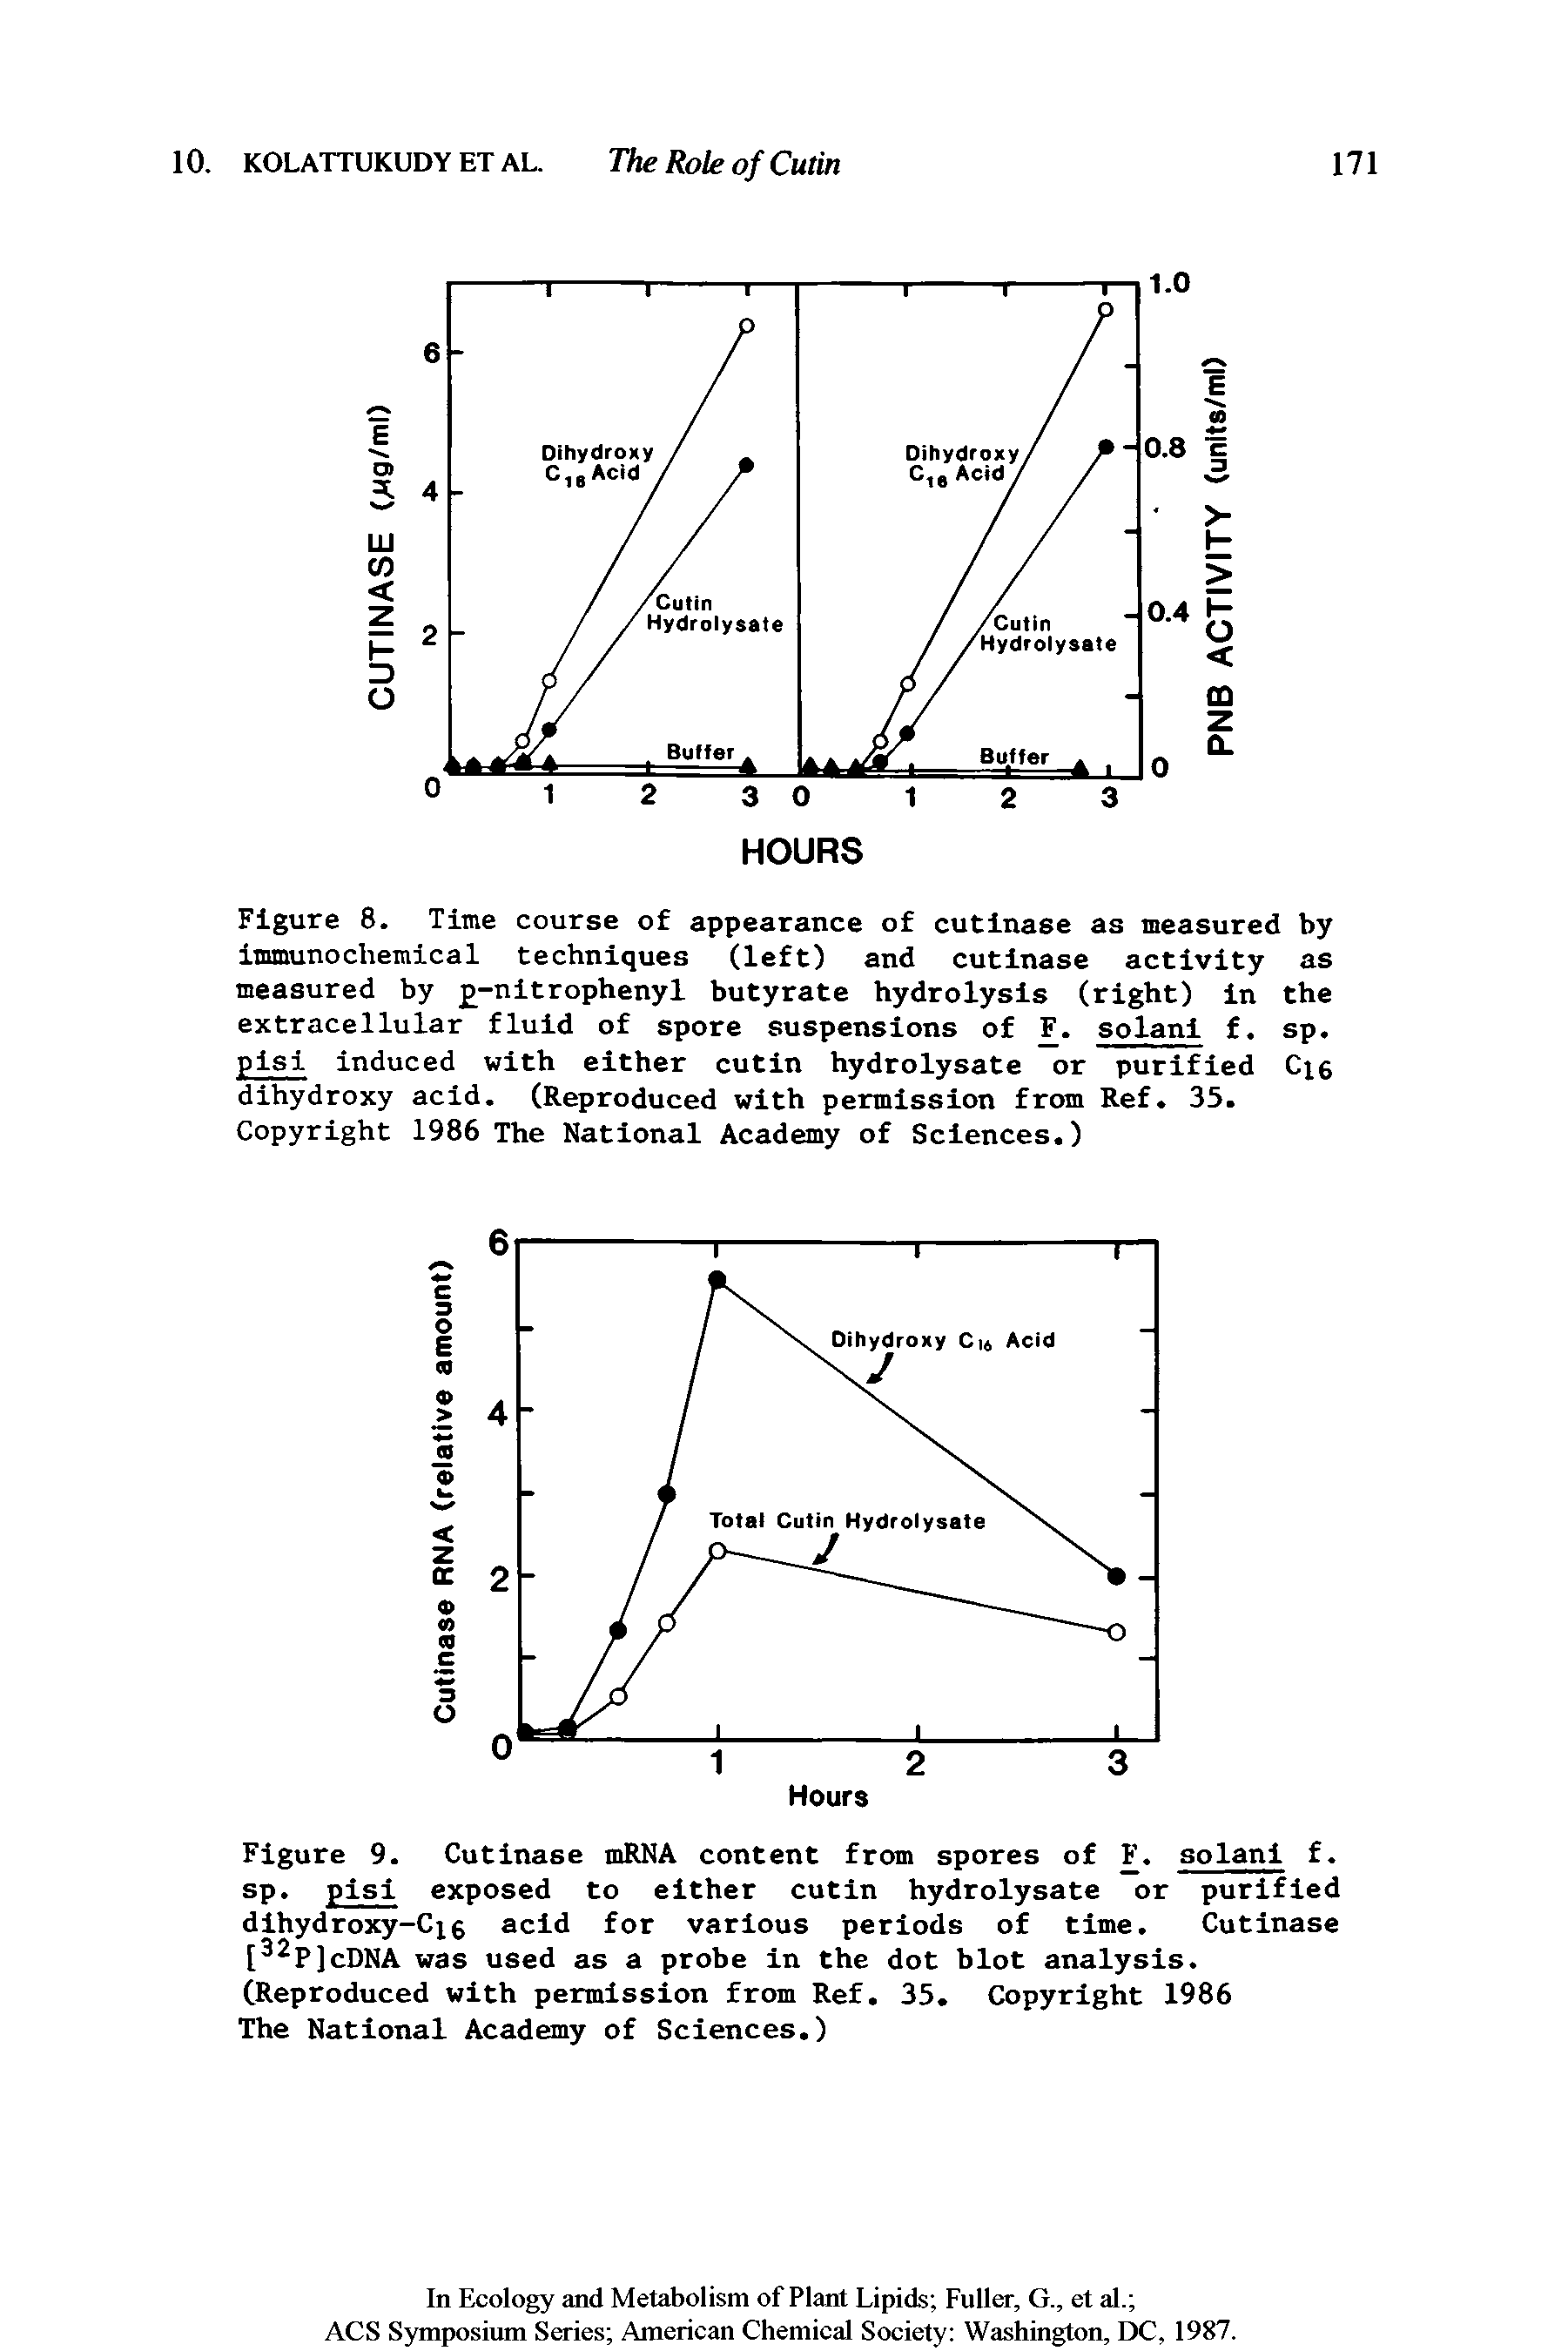 Figure 9. Cutinase mRNA content from spores of F. solani f. sp. pisi exposed to either cutin hydrolysate or purified dihydroxy-Cx acid for various periods of time. Cutinase [ P]cDNA was used as a probe in the dot blot analysis. (Reproduced with permission from Ref. 35. Copyright 1986 The National Academy of Sciences.)...